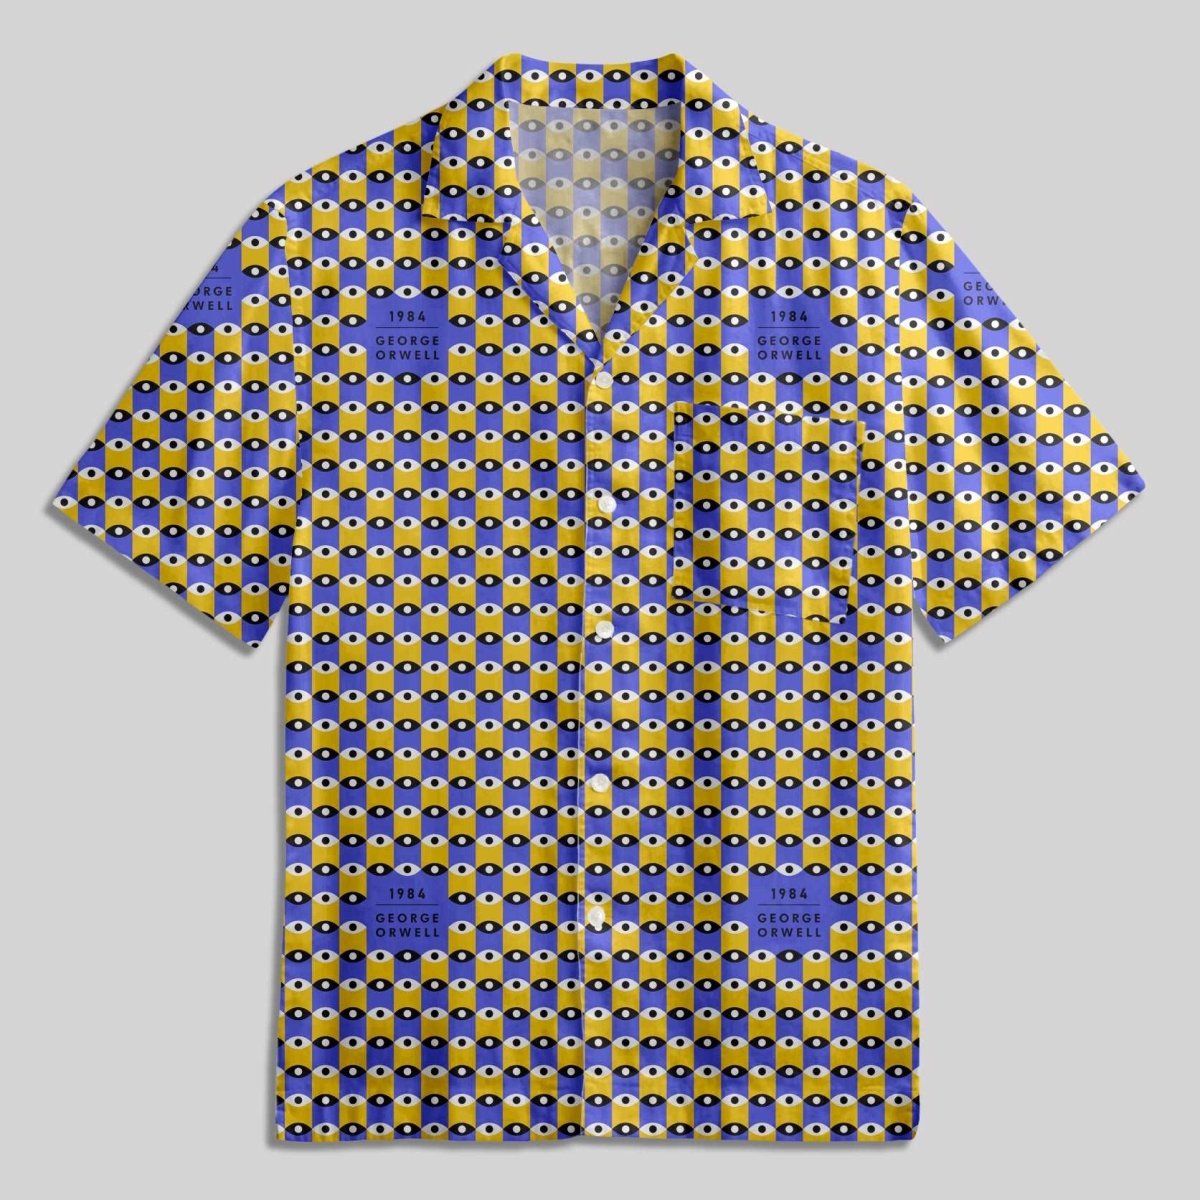 1984-George Orwell Button Up Pocket Shirt - Geeksoutfit